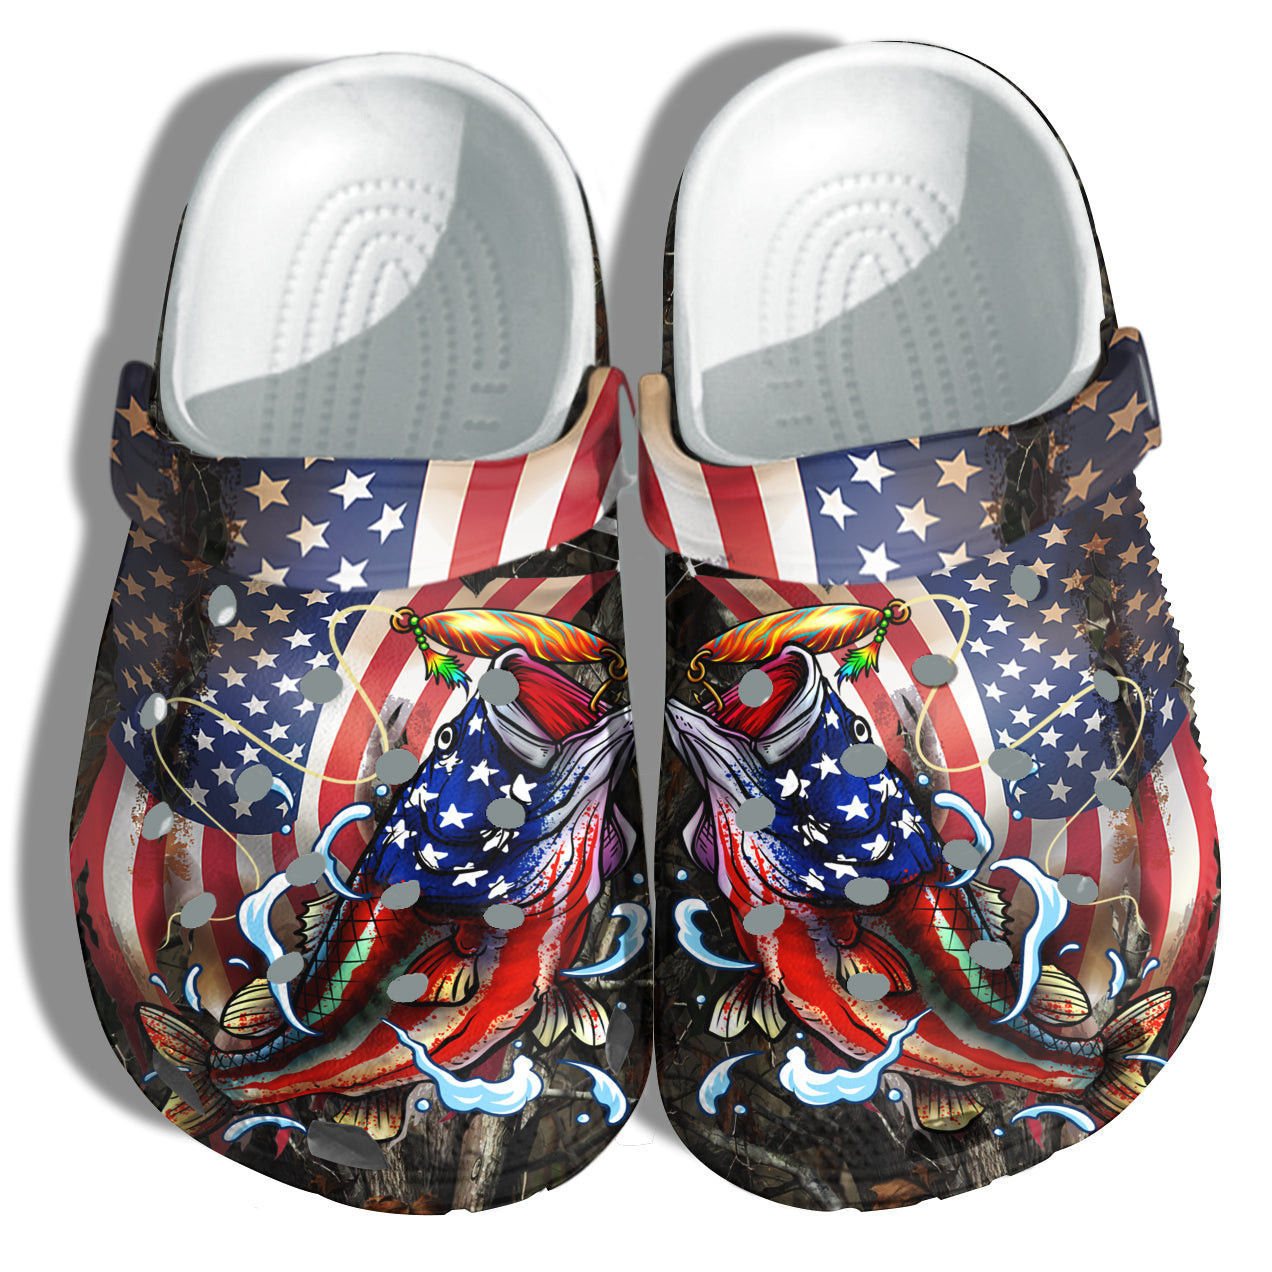 Hook Fishing 4Th Of July Crocs Clog Shoes Gift Men Father Day- Nature Fish America Flag Nationdal Day Crocs Clog Shoes Birthday Gift Daddy